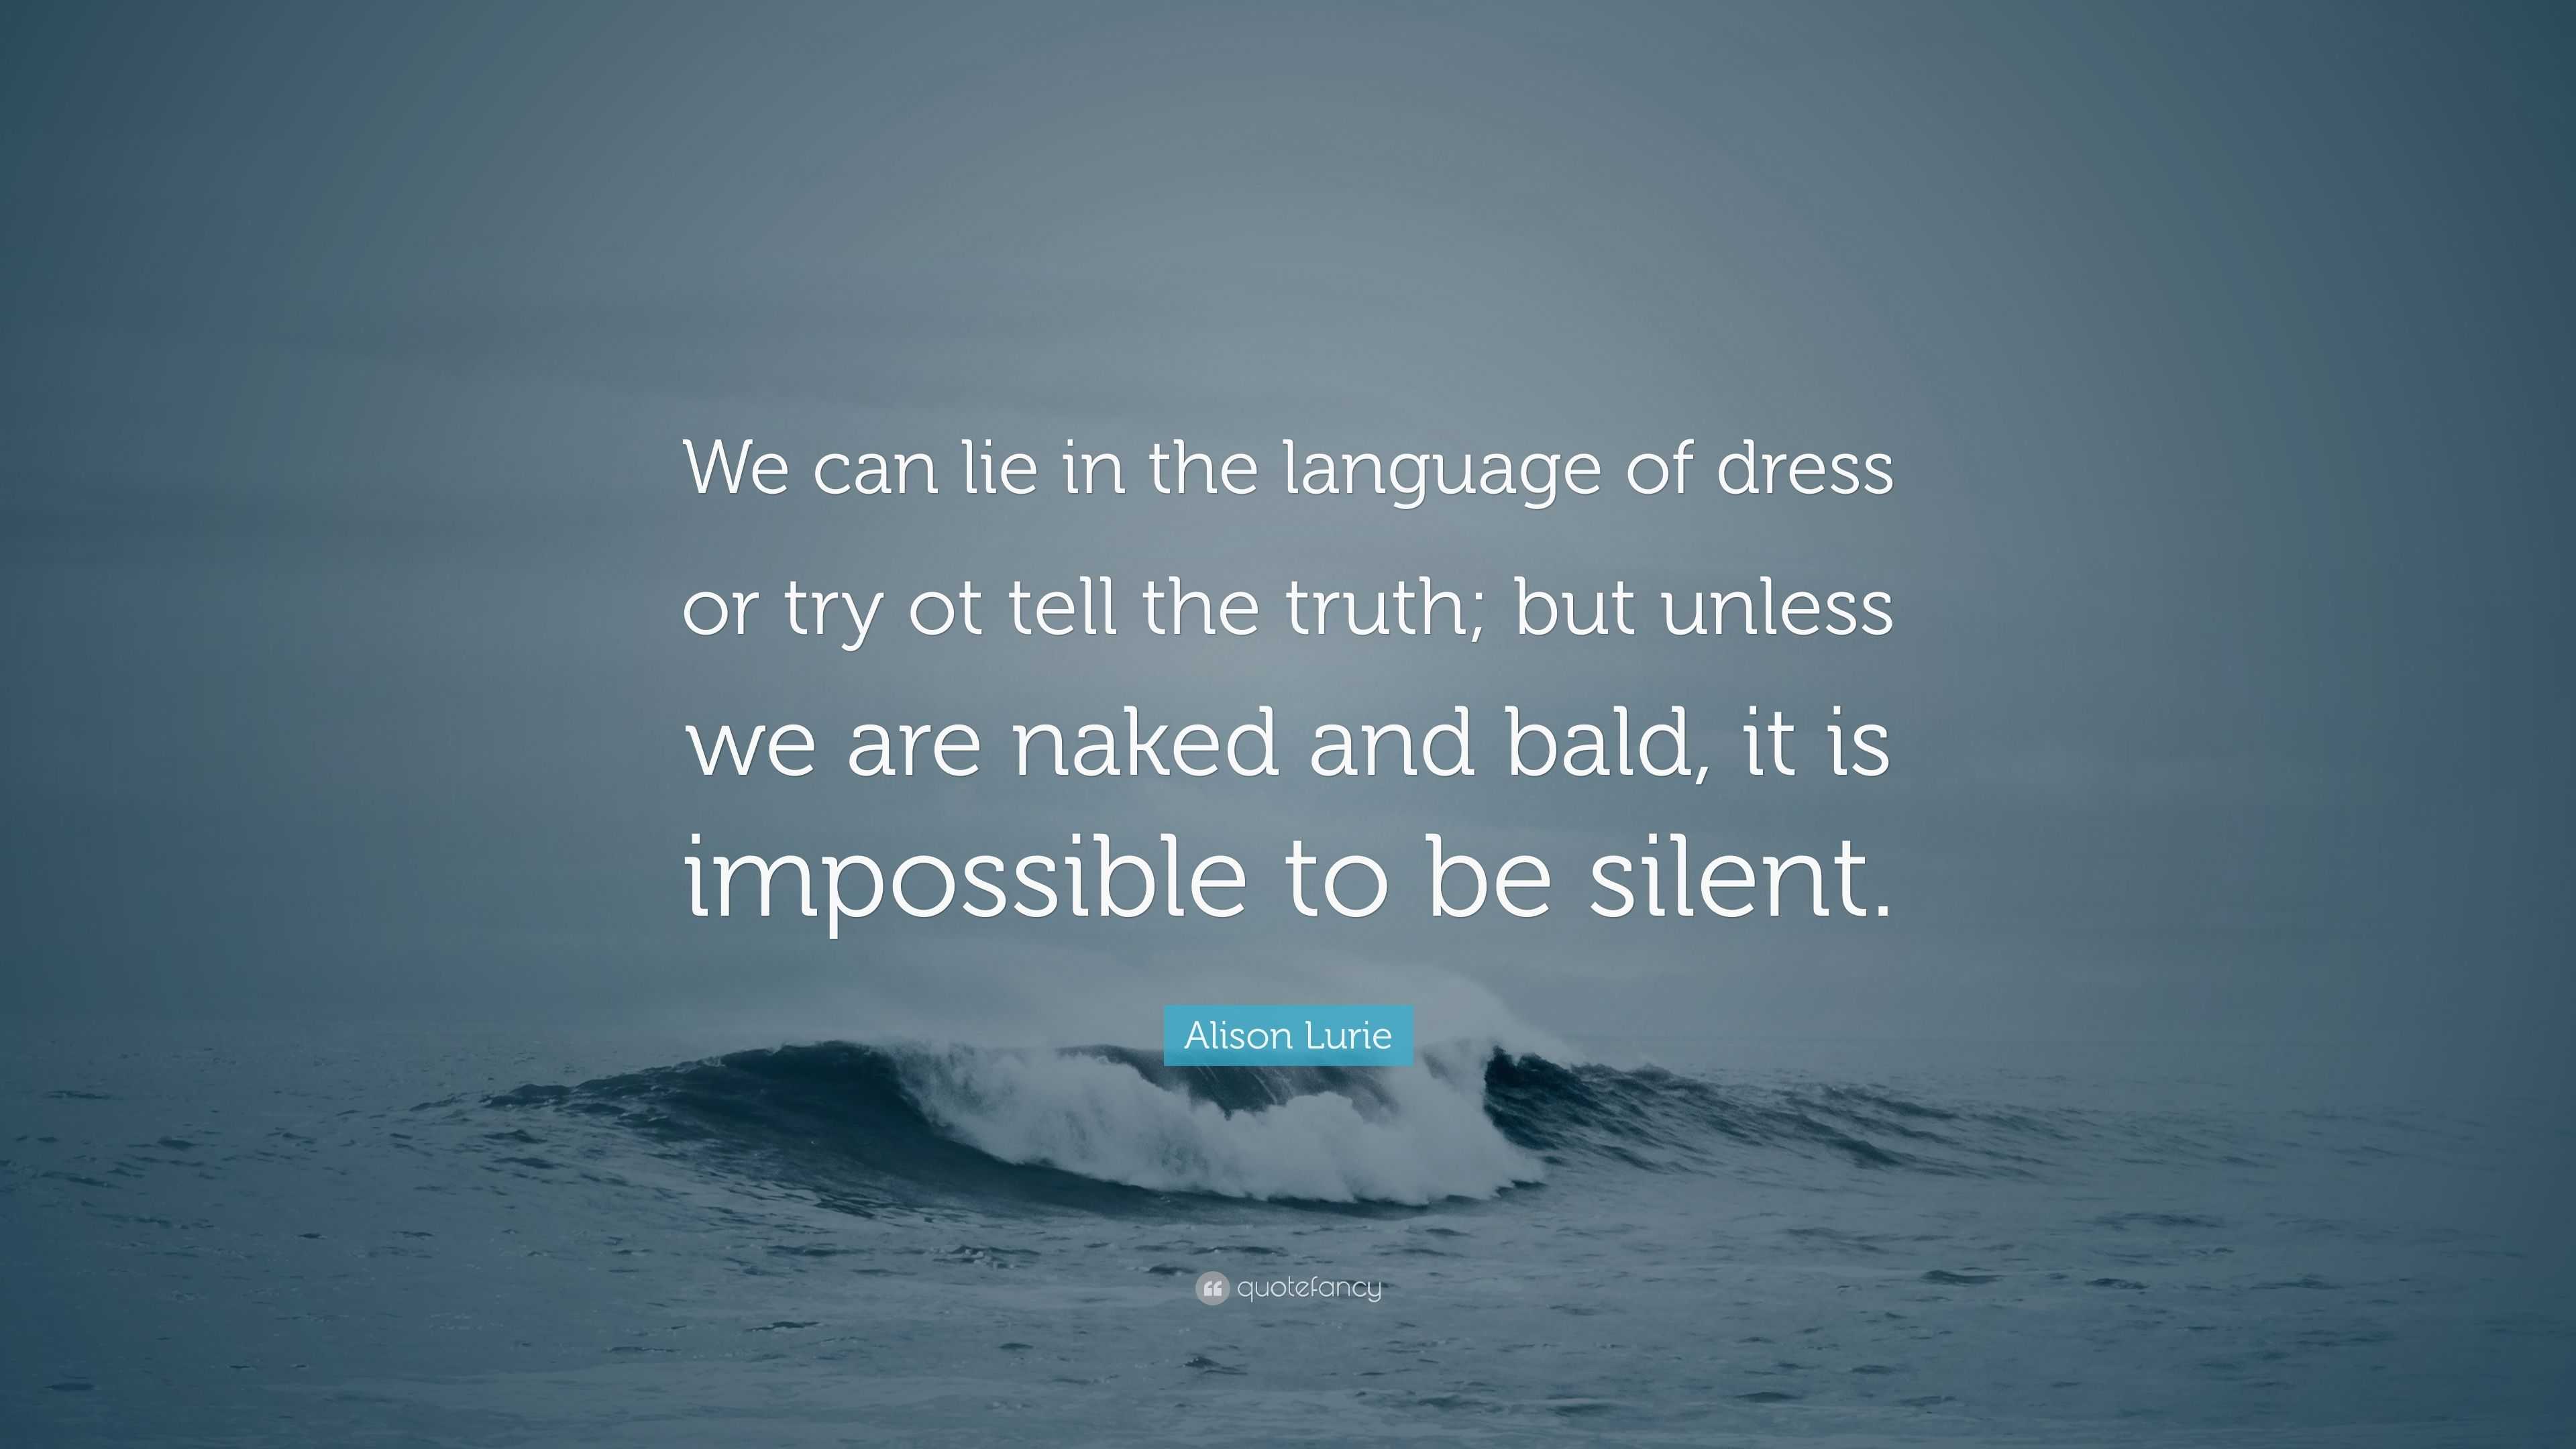 Alison Lurie Quote: “We can lie in the language of dress or try ot tell ...